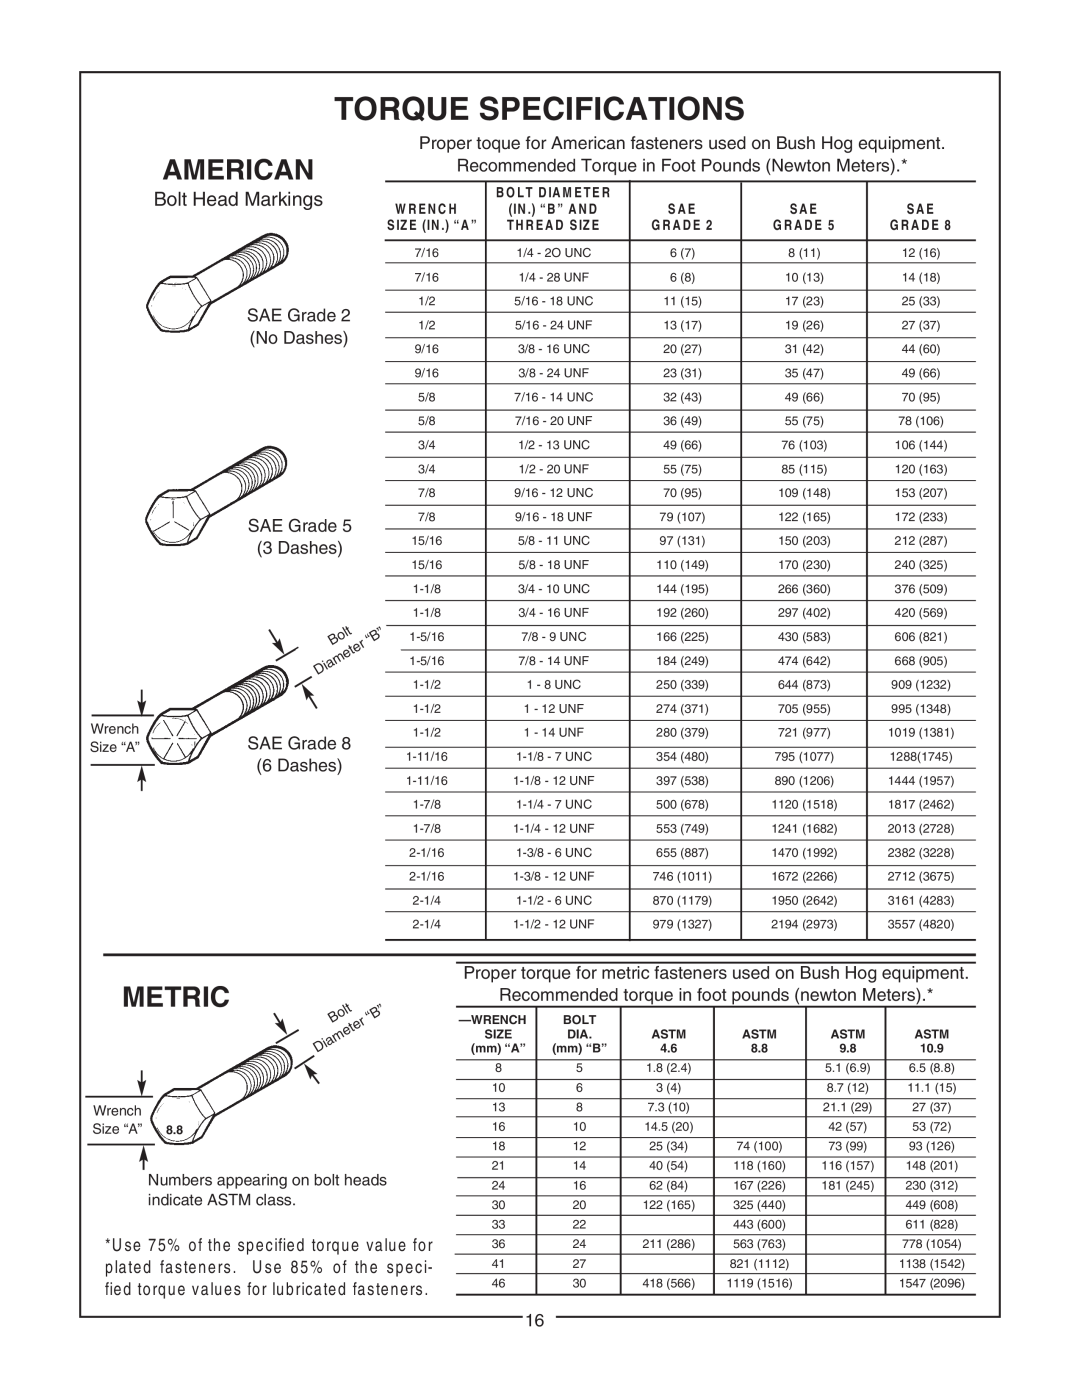 Bush Hog RTN Torque Specifications, American, Metric, Bolt Head Markings, Recommended Torque in Foot Pounds Newton Meters 